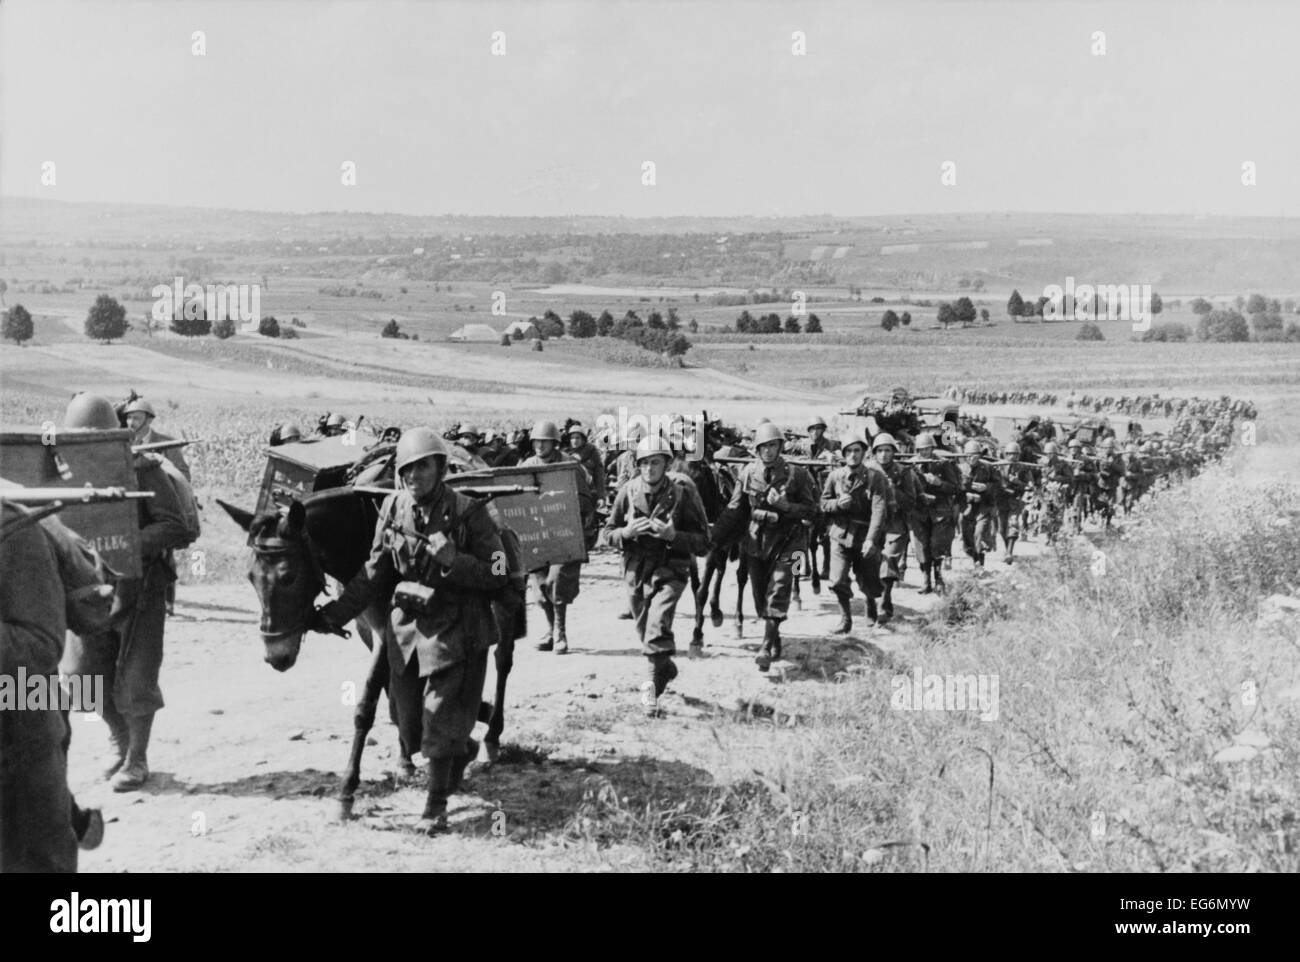 Italian expeditionary troops and artillery march to the Eastern front during World War 2. July 1941. Allied with Nazi Germany, Stock Photo